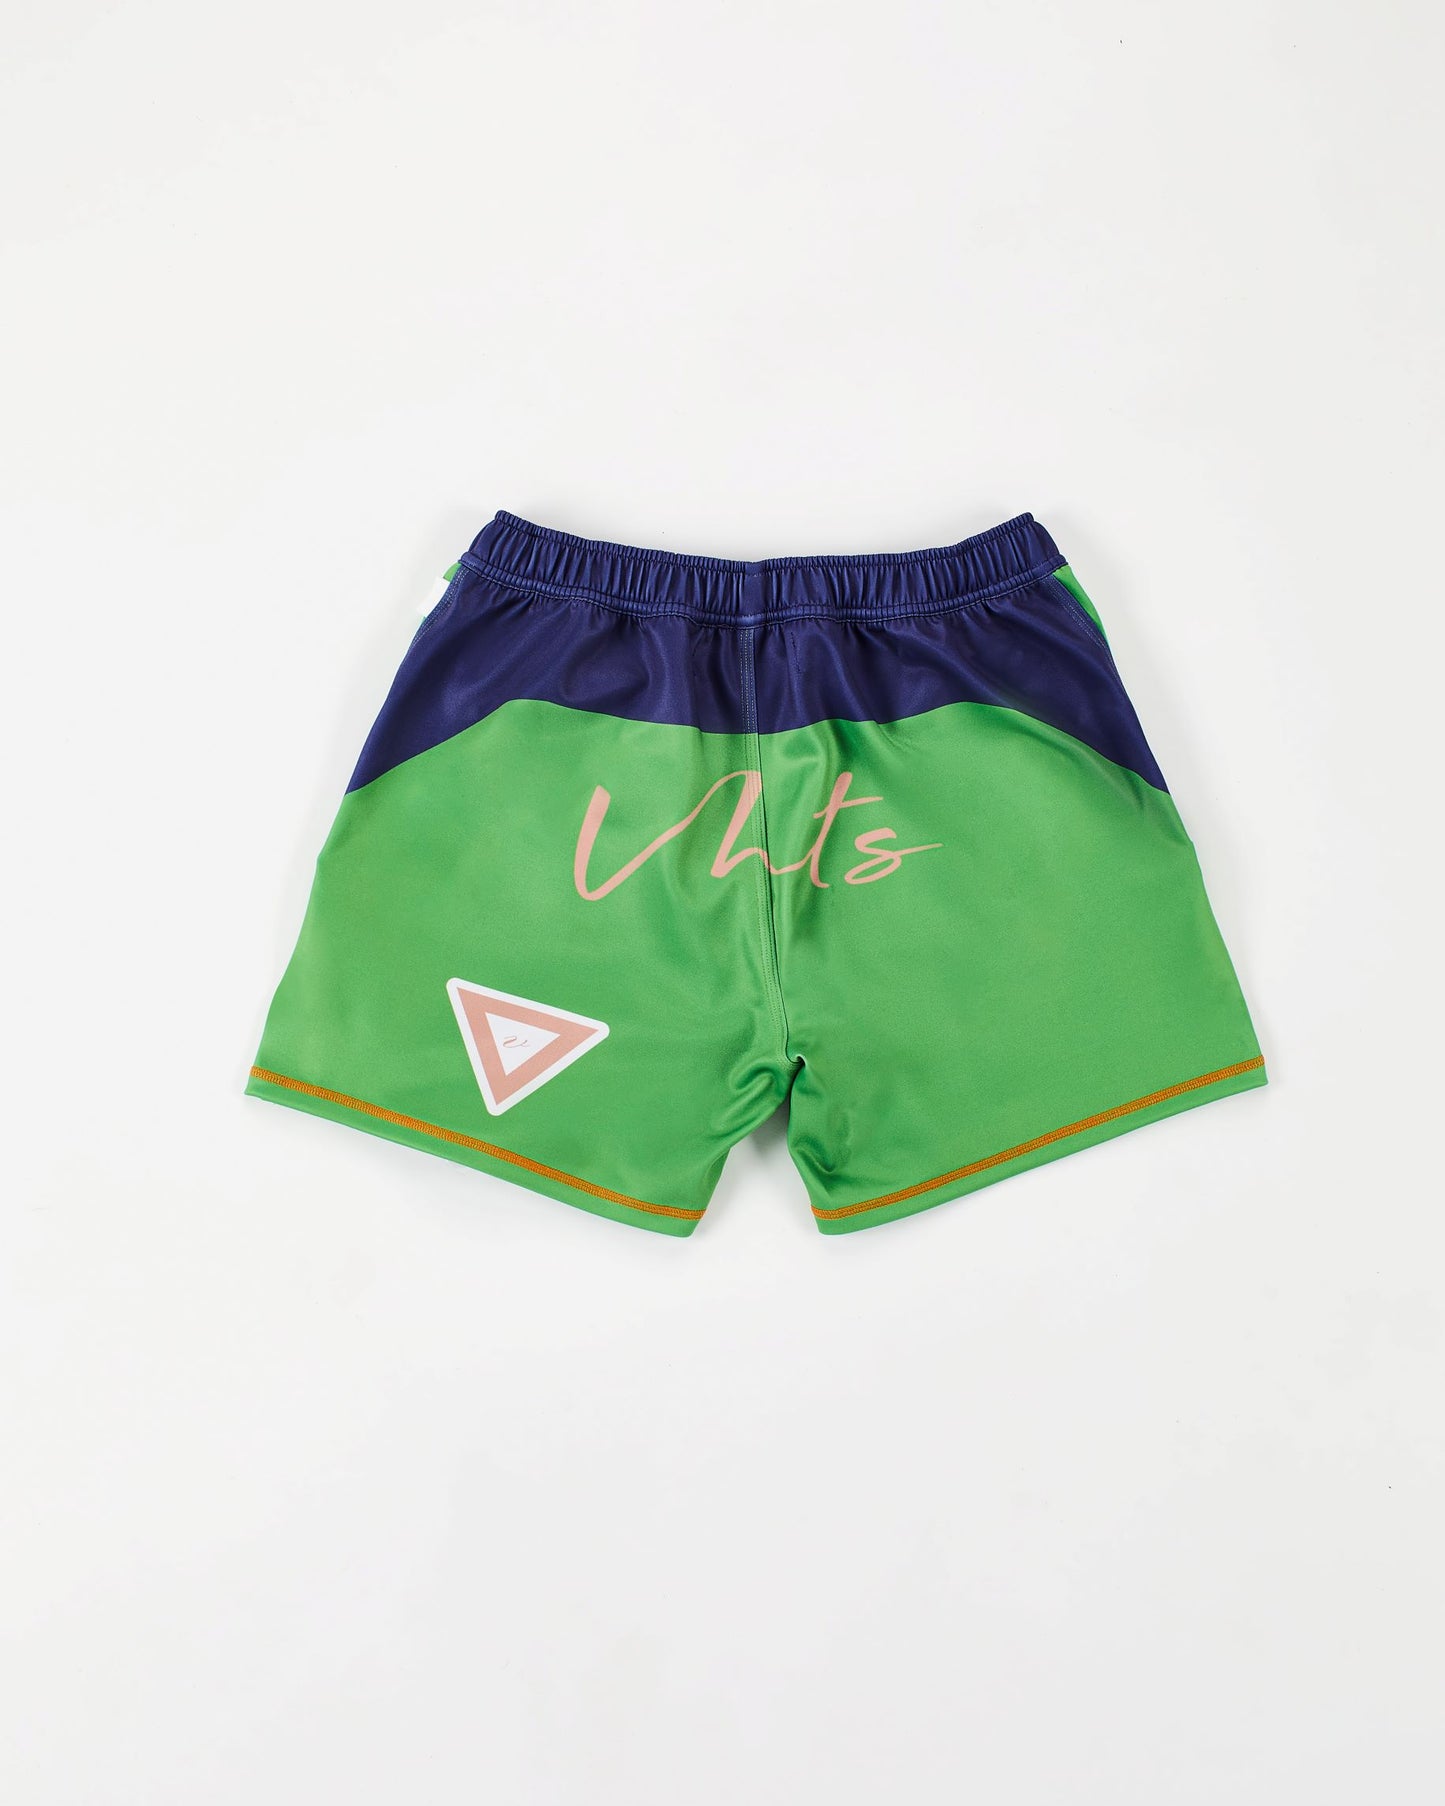 Spring/ Summer 2023 special edition "Piccolo23" Combat shorts